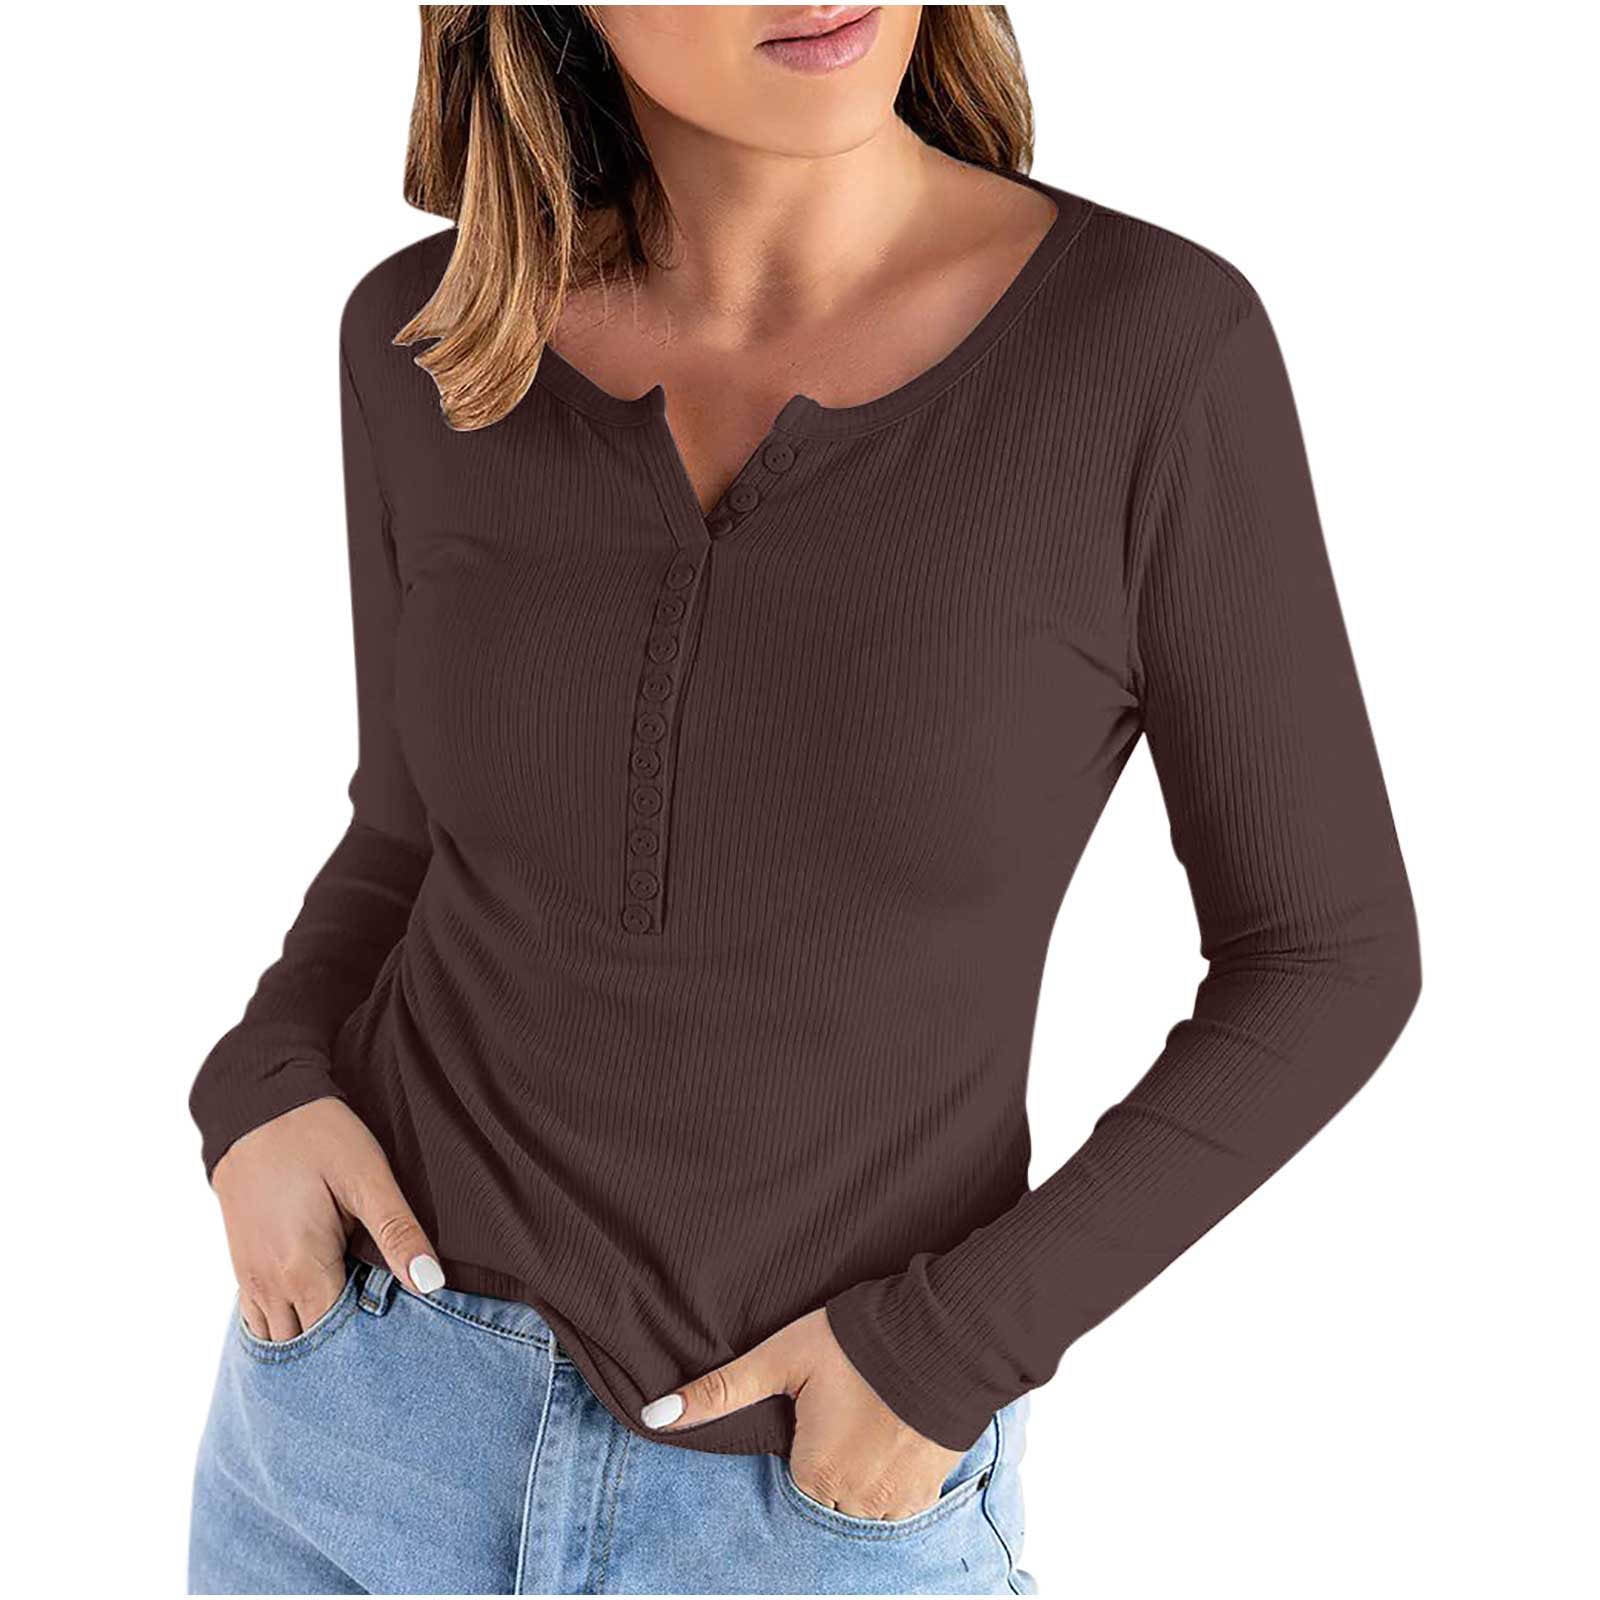 Women Compression Shirt Woman Shirt Solid Long Sleeved Spring Autumn  Cardigan Shirt for Clothing New Henley Tshirt